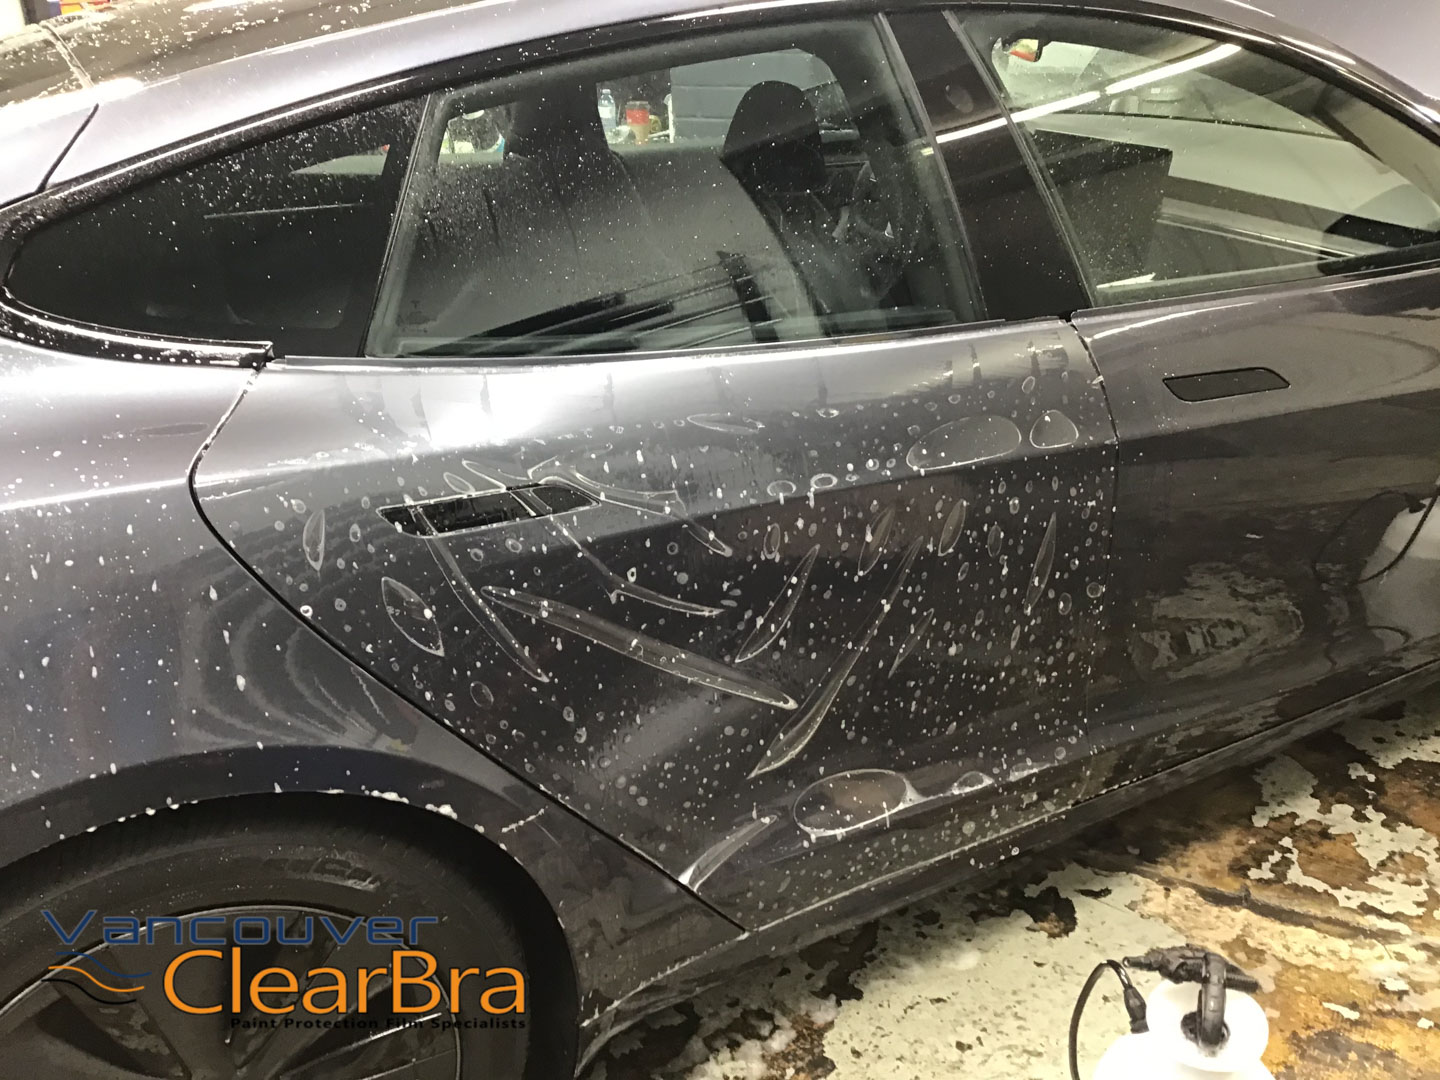 xpel-ultimate-xpel-stealth-satin-clear-bra-paint-protection-film-Vancouver-ClearBra-1058.jpg